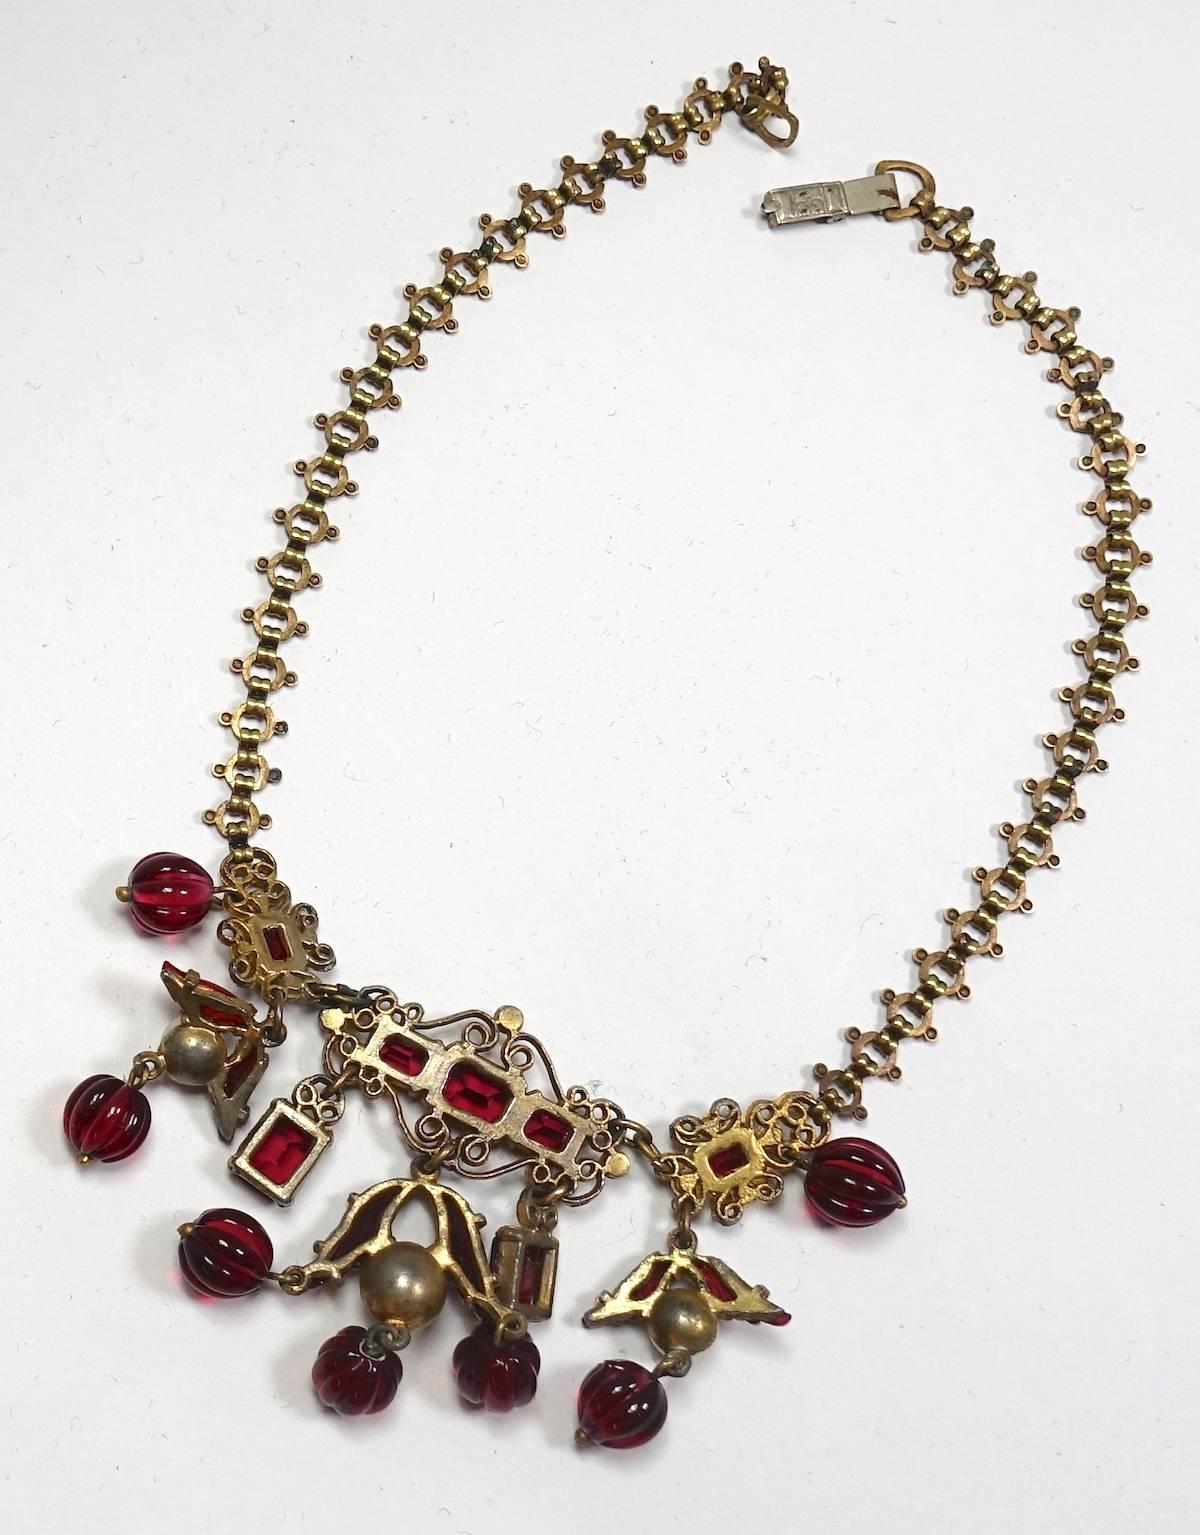 This deco vintage 1930s French necklace has a book chain necklace leading down to faux pearls and red carved glass beads in a gold-plated base metal setting.  In excellent condition, this necklace measures 14-1/2” with a fold-over clasp and the